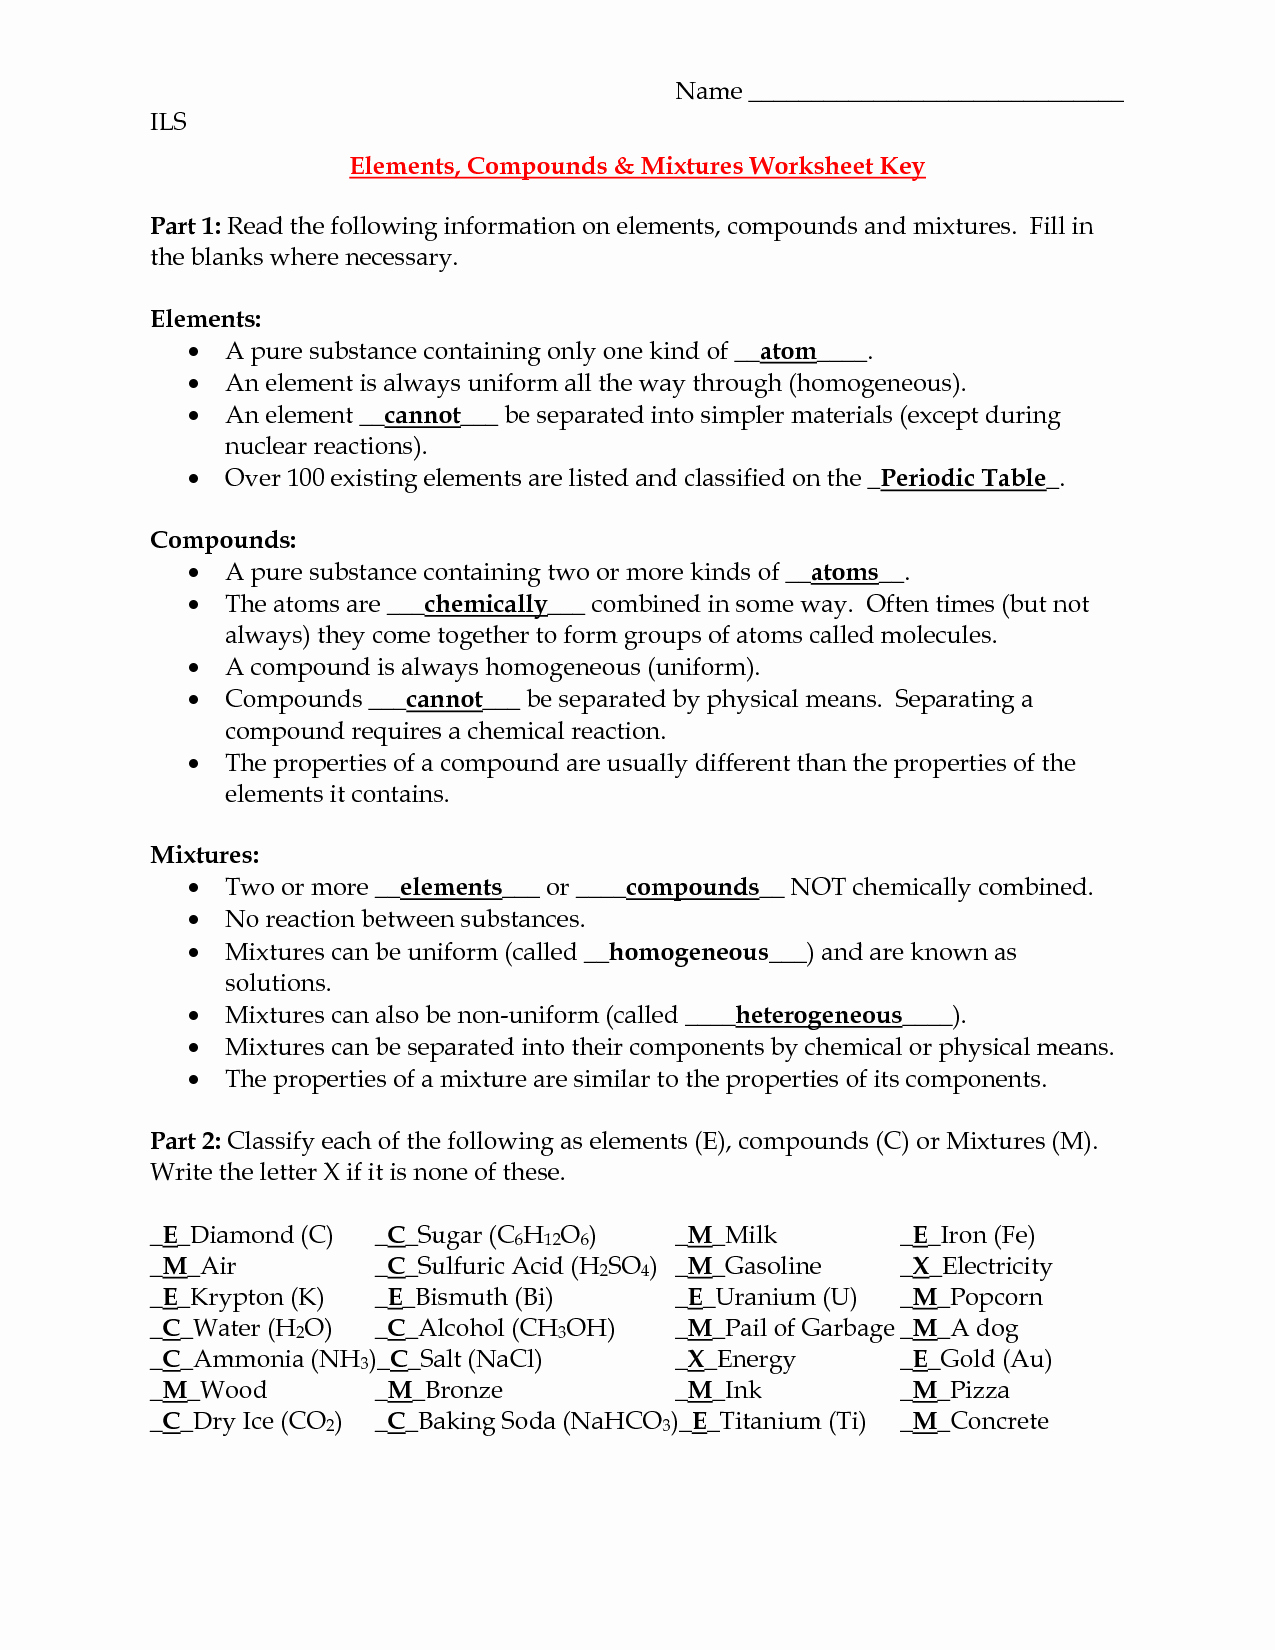 Elements and Compounds Worksheet Luxury 17 Best Of Elements Pounds and Mixtures